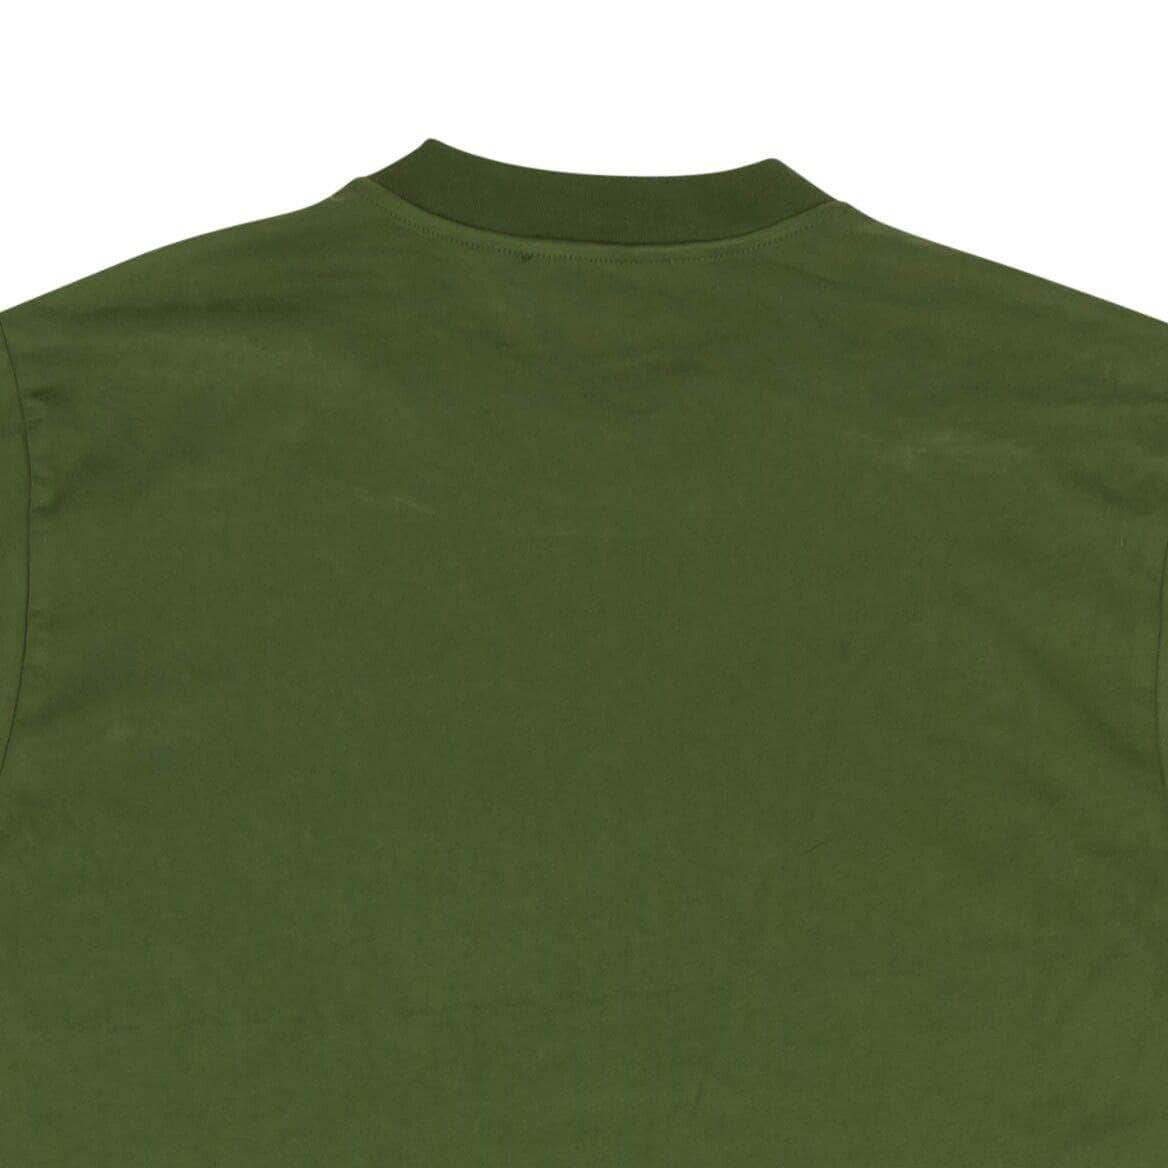 Sunnei channelenable-all, chicmi, couponcollection, gender-mens, main-clothing, mens-shoes, size-m, sunnei, under-250 M Green Attached T-Shirt 87AB-SN-1003/M 87AB-SN-1003/M